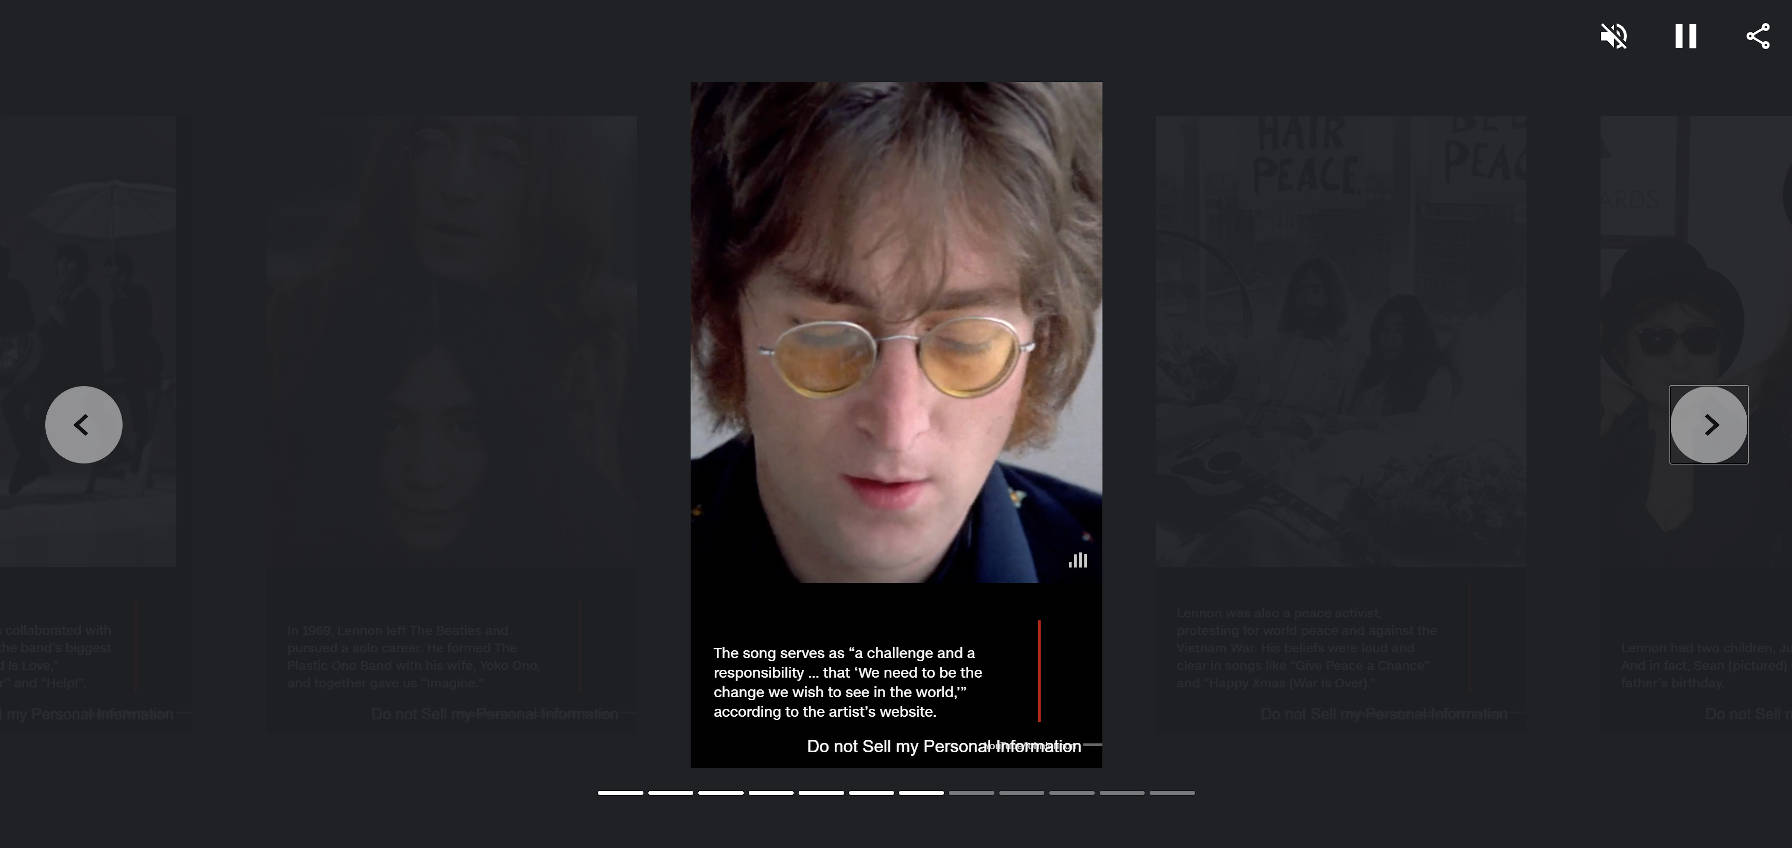 Web Story page from CNN's coverage of John Lennon.